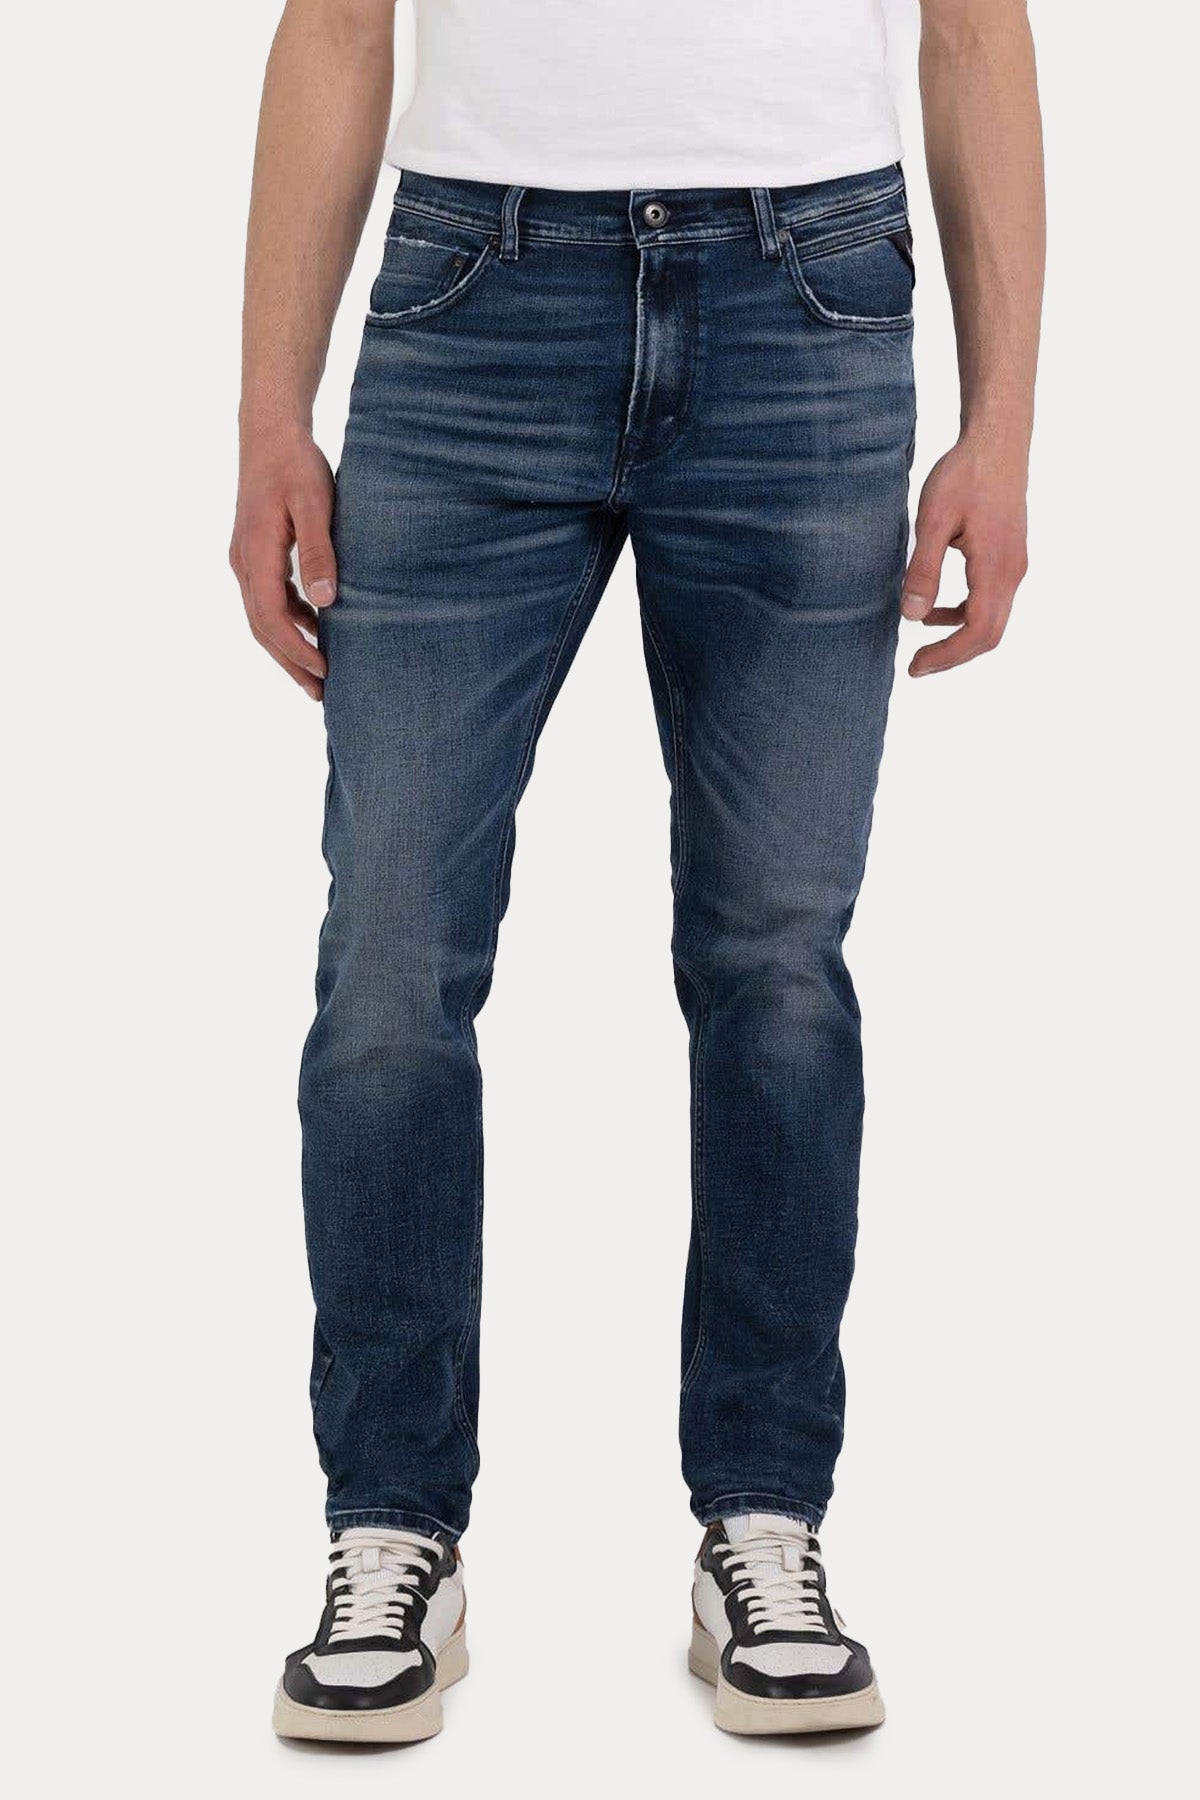 Replay Mickym Slim Tapered Fit Jeans-Libas Trendy Fashion Store